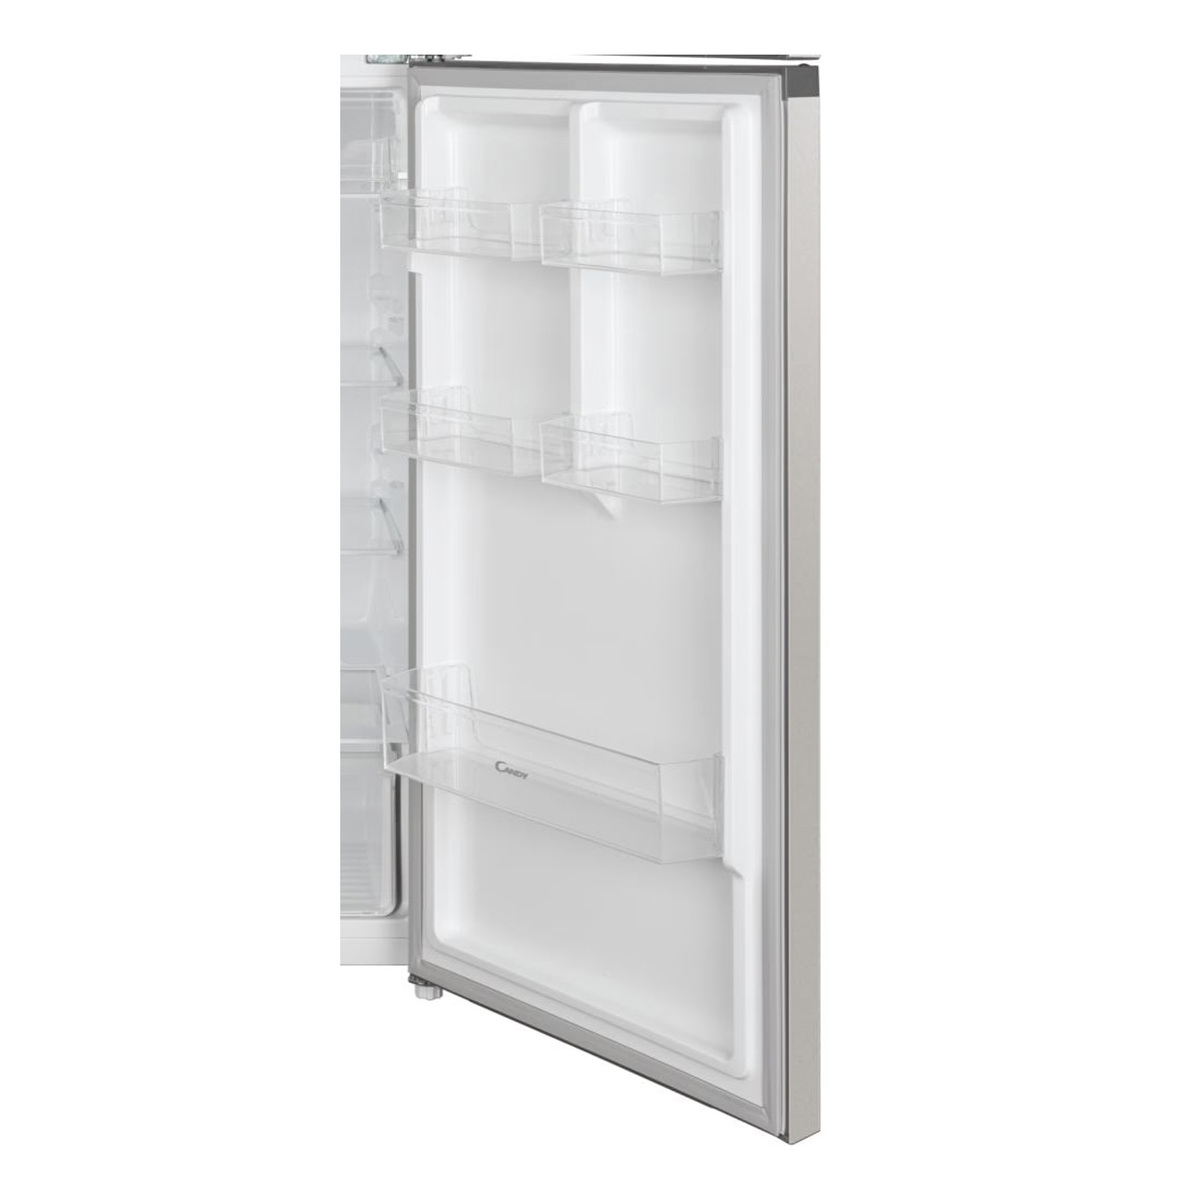 Candy Double Door Refrigerator,Silver,480LTR Gross, 348L Net,Total no Frost,Electronic Control, LED Light,CCDN-470S-19